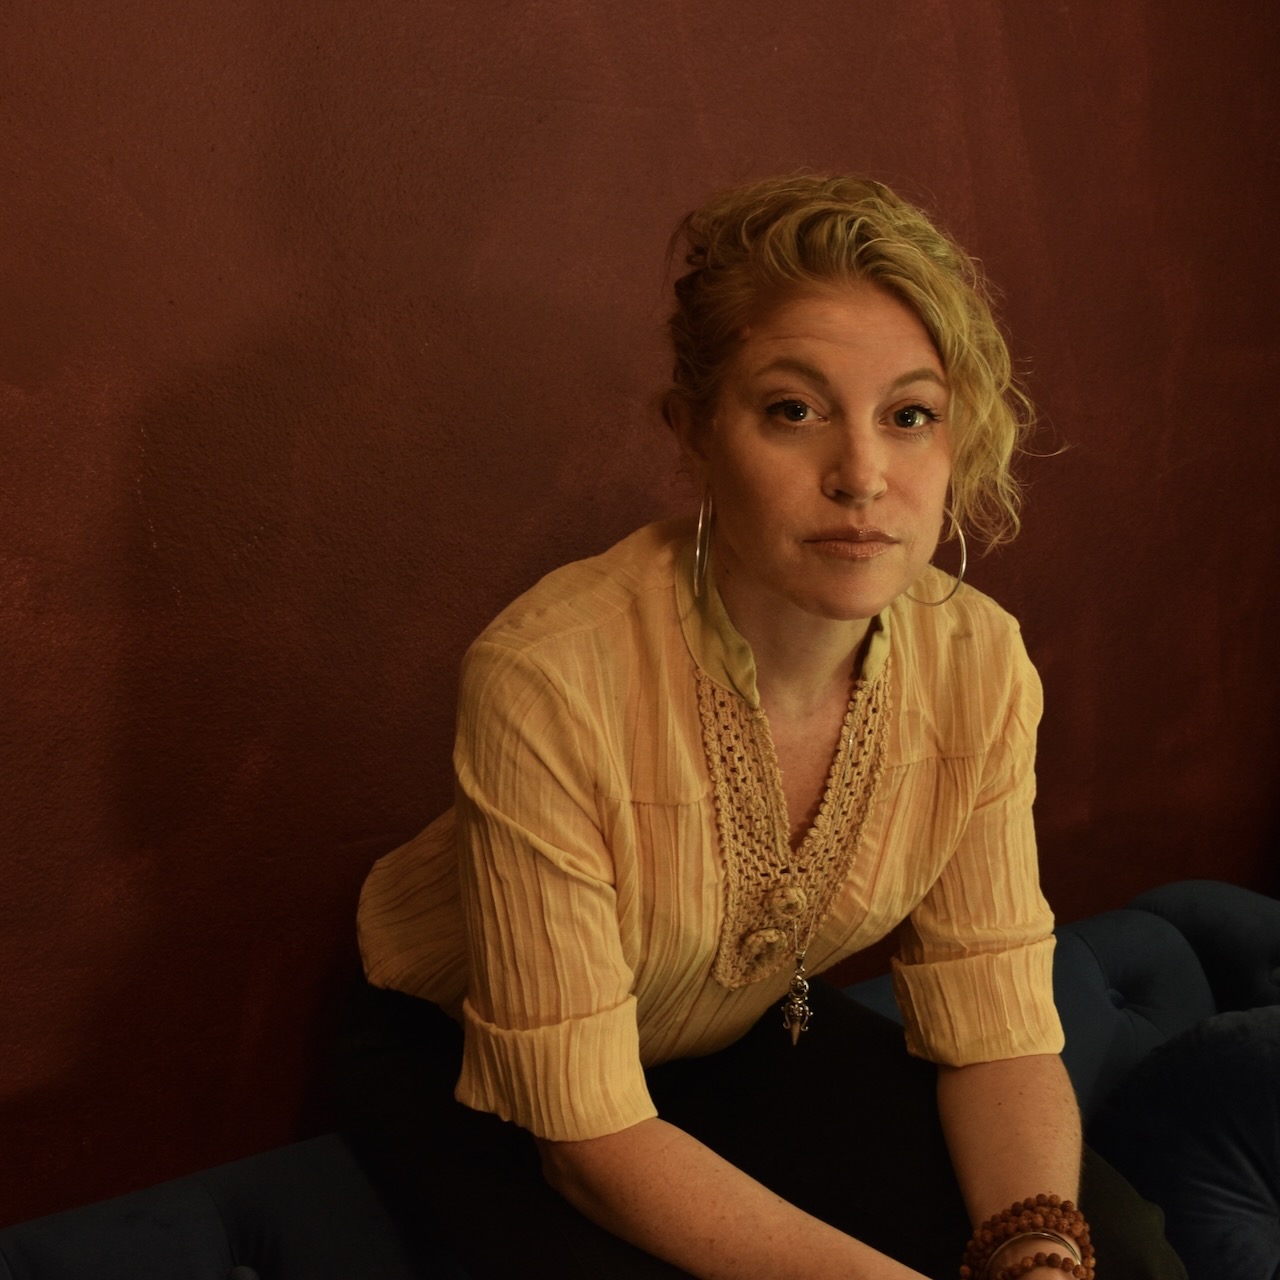 LISTEN: Jessica Rotter, 'Porch Song'